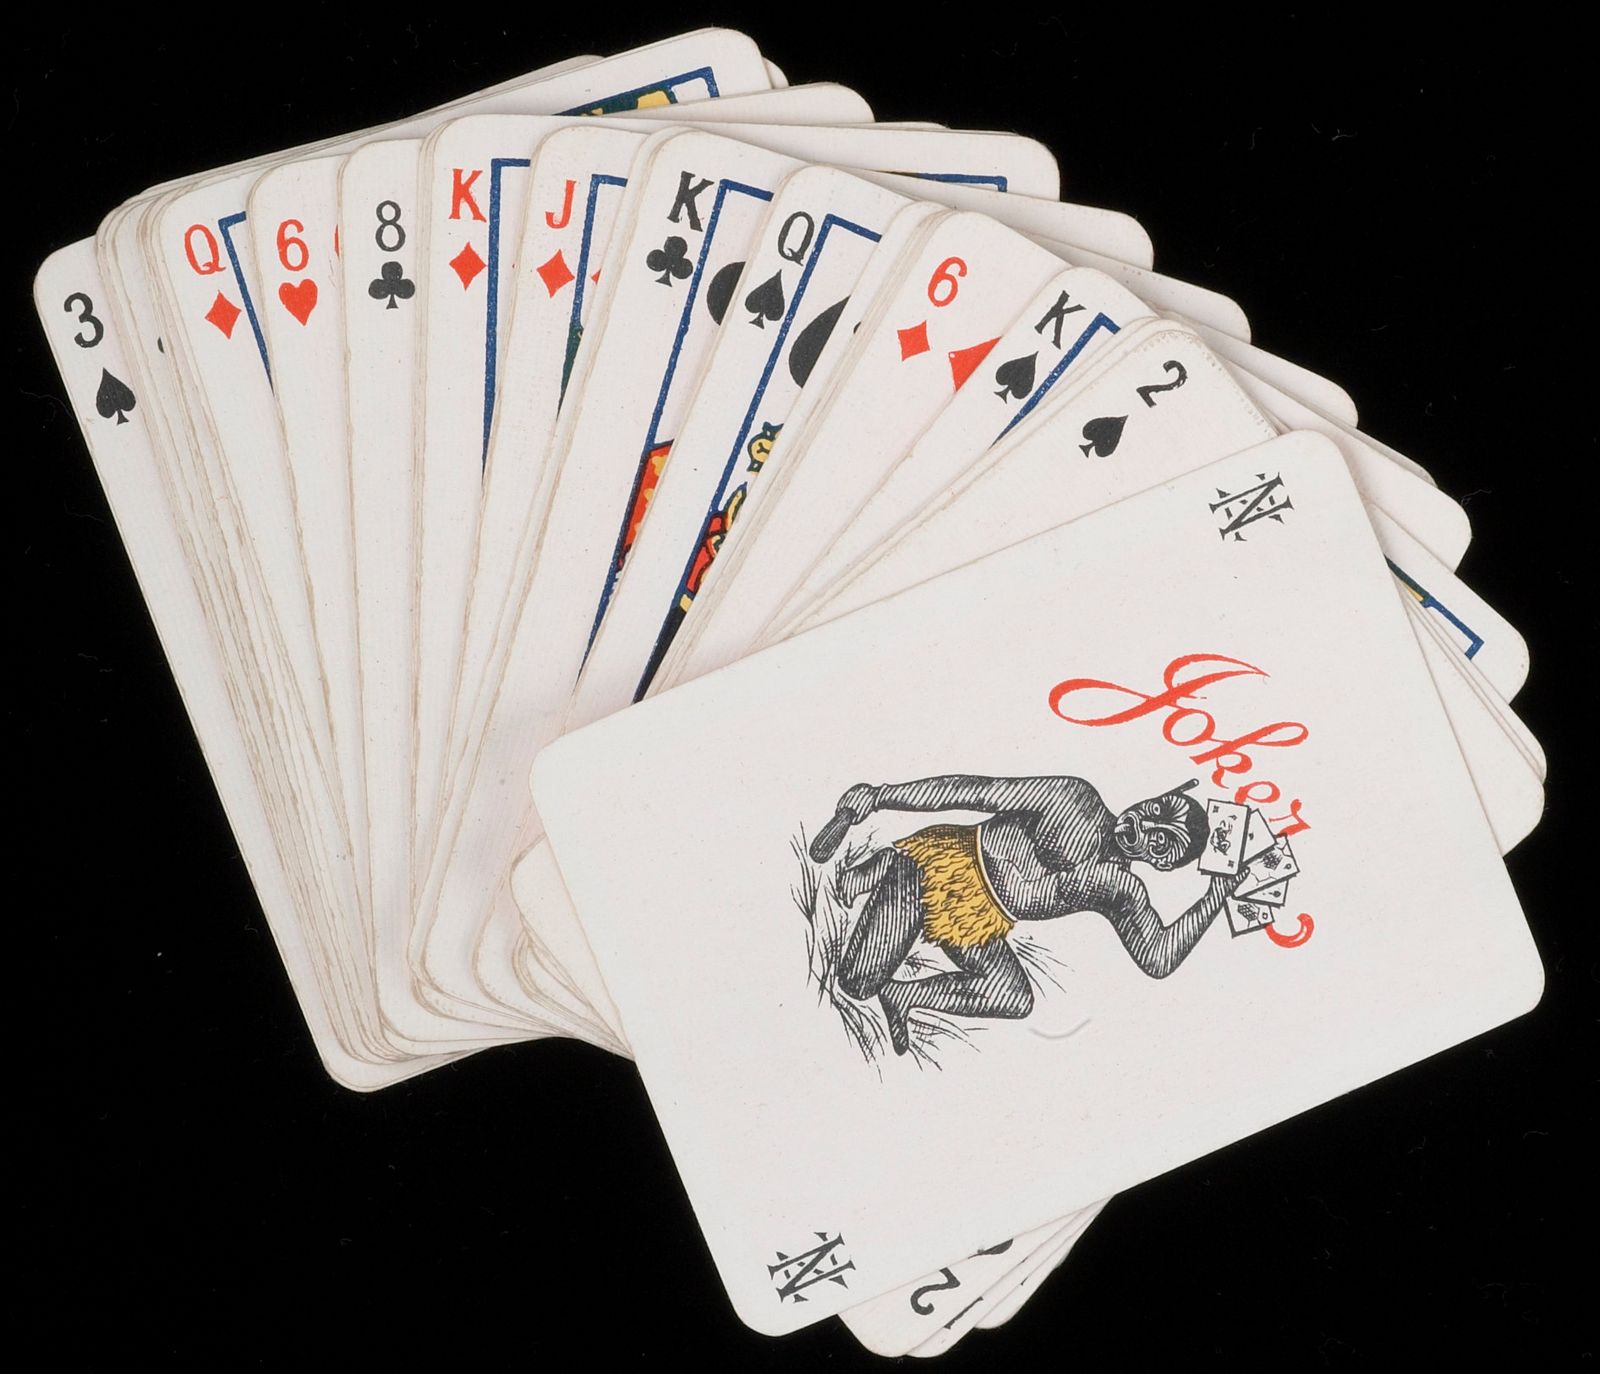 A spread of playing cards with joker on top. The joker has an image of a Māori warrior flourishing playing cards.